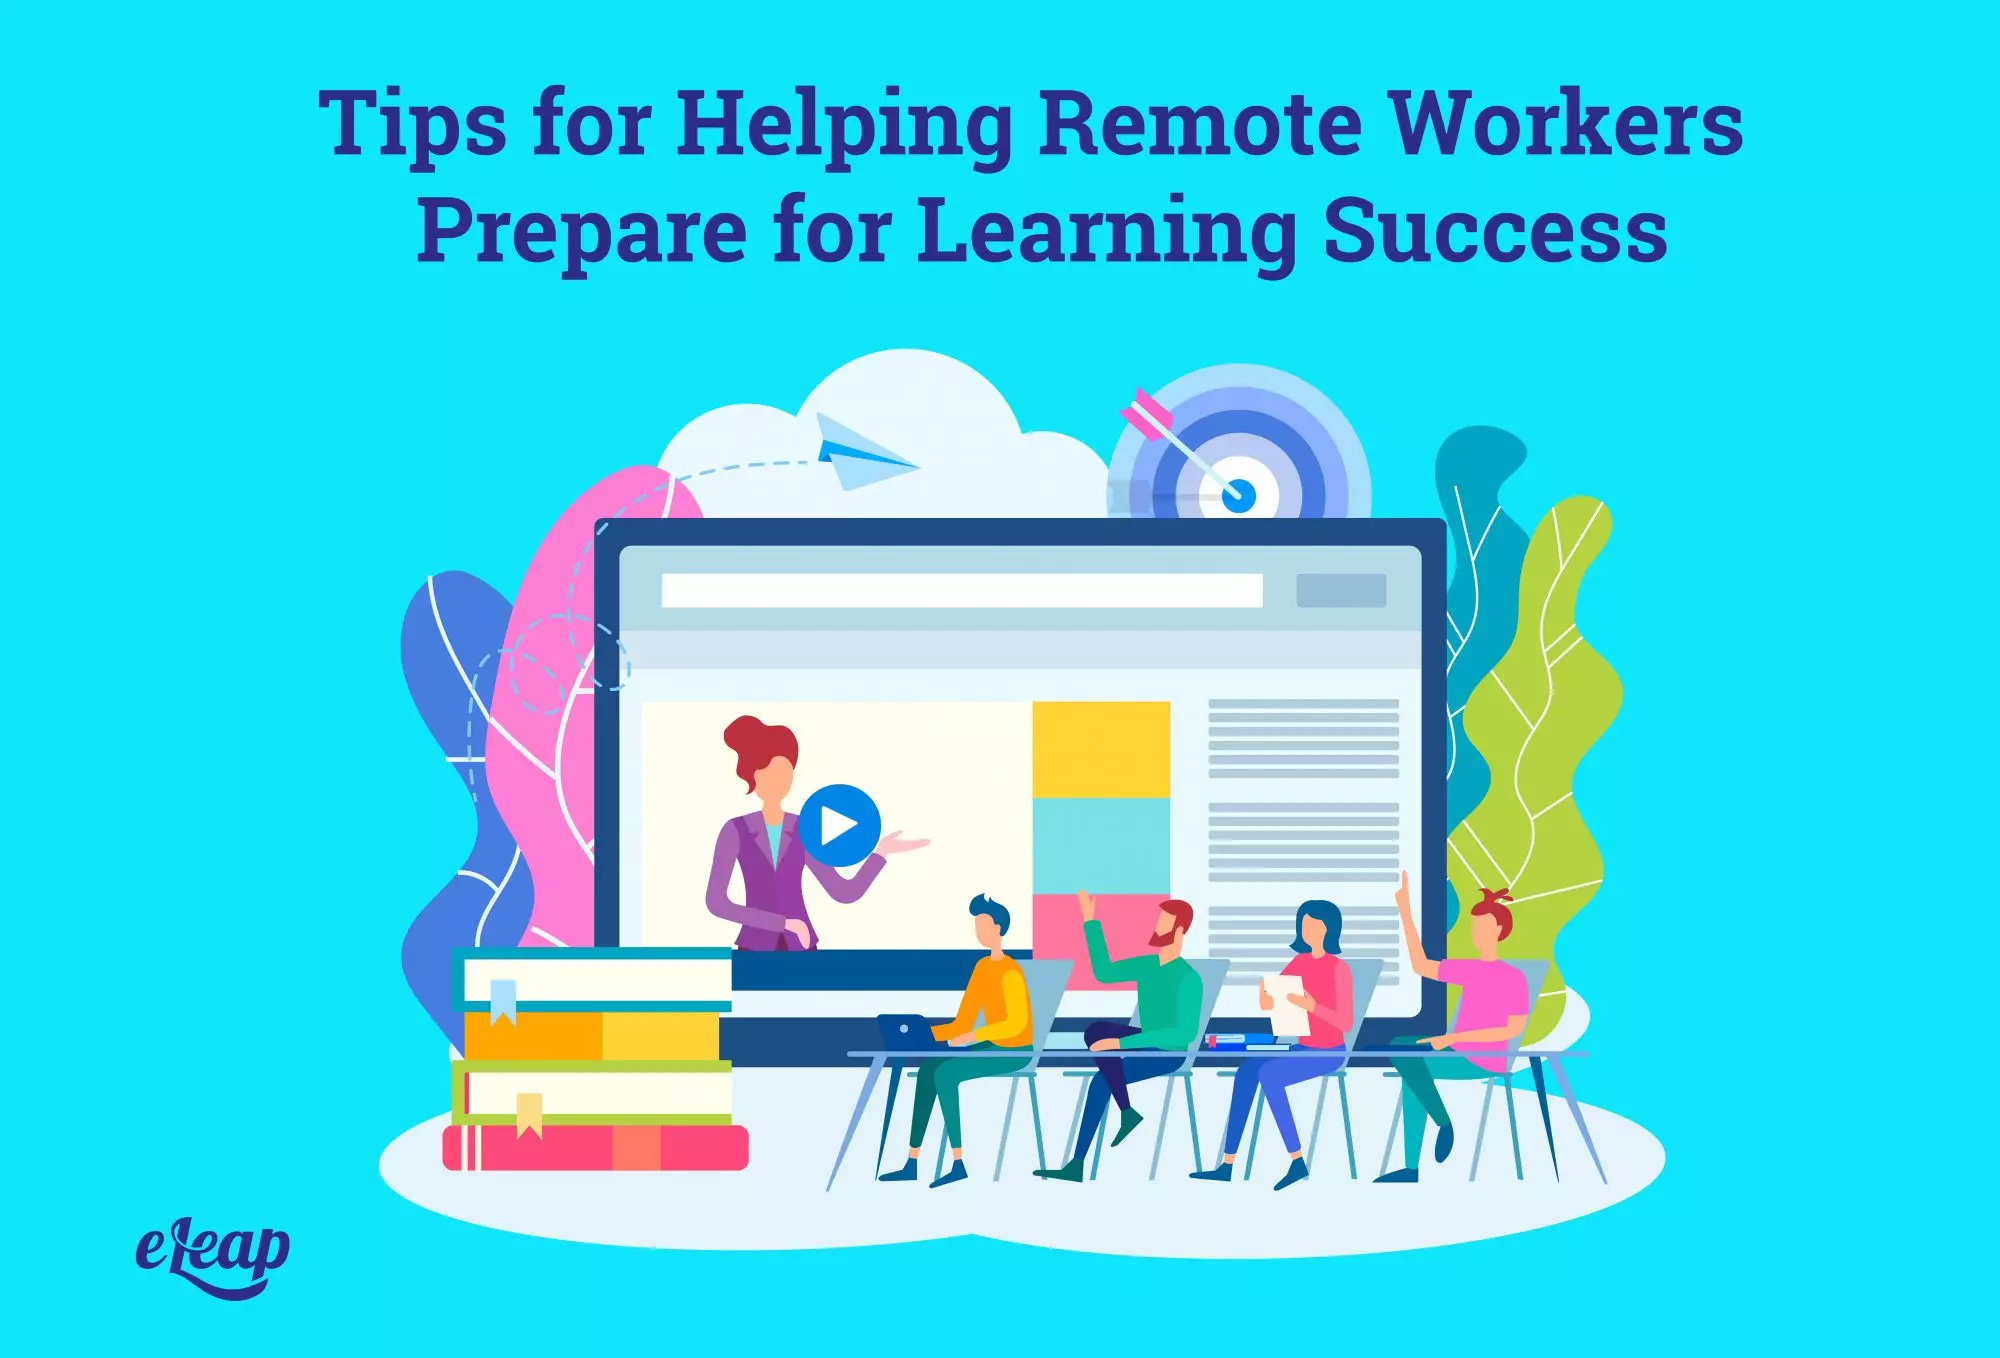 Tips for Helping Remote Workers Prepare for Learning Success